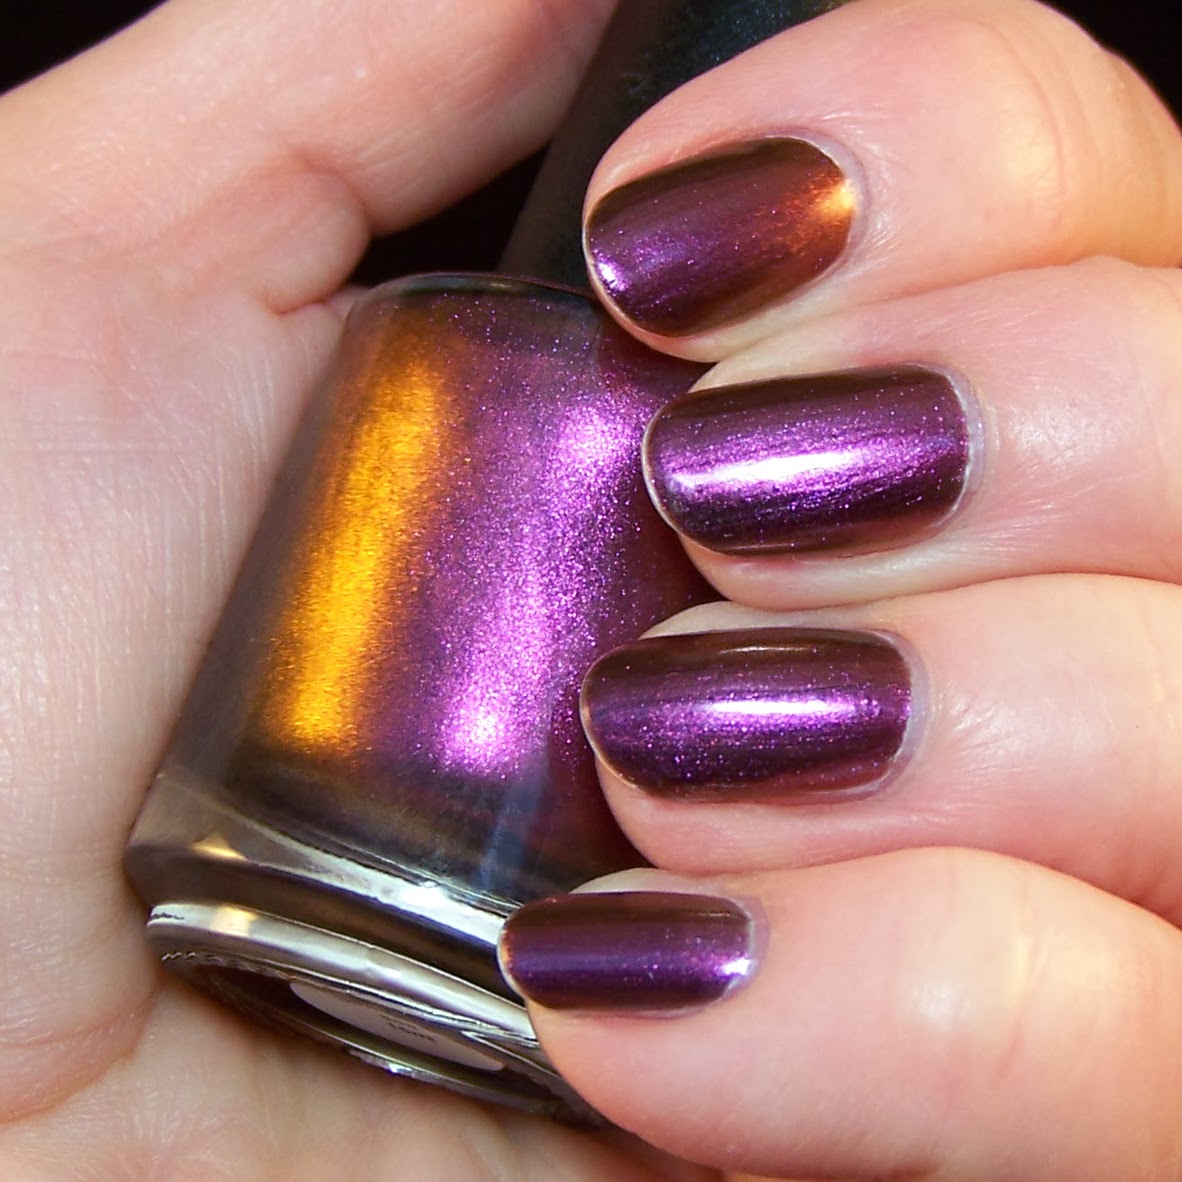 Rockjewel Nails: Rockjewel relaxes with Lilypad Lacquer Sunset At Sea